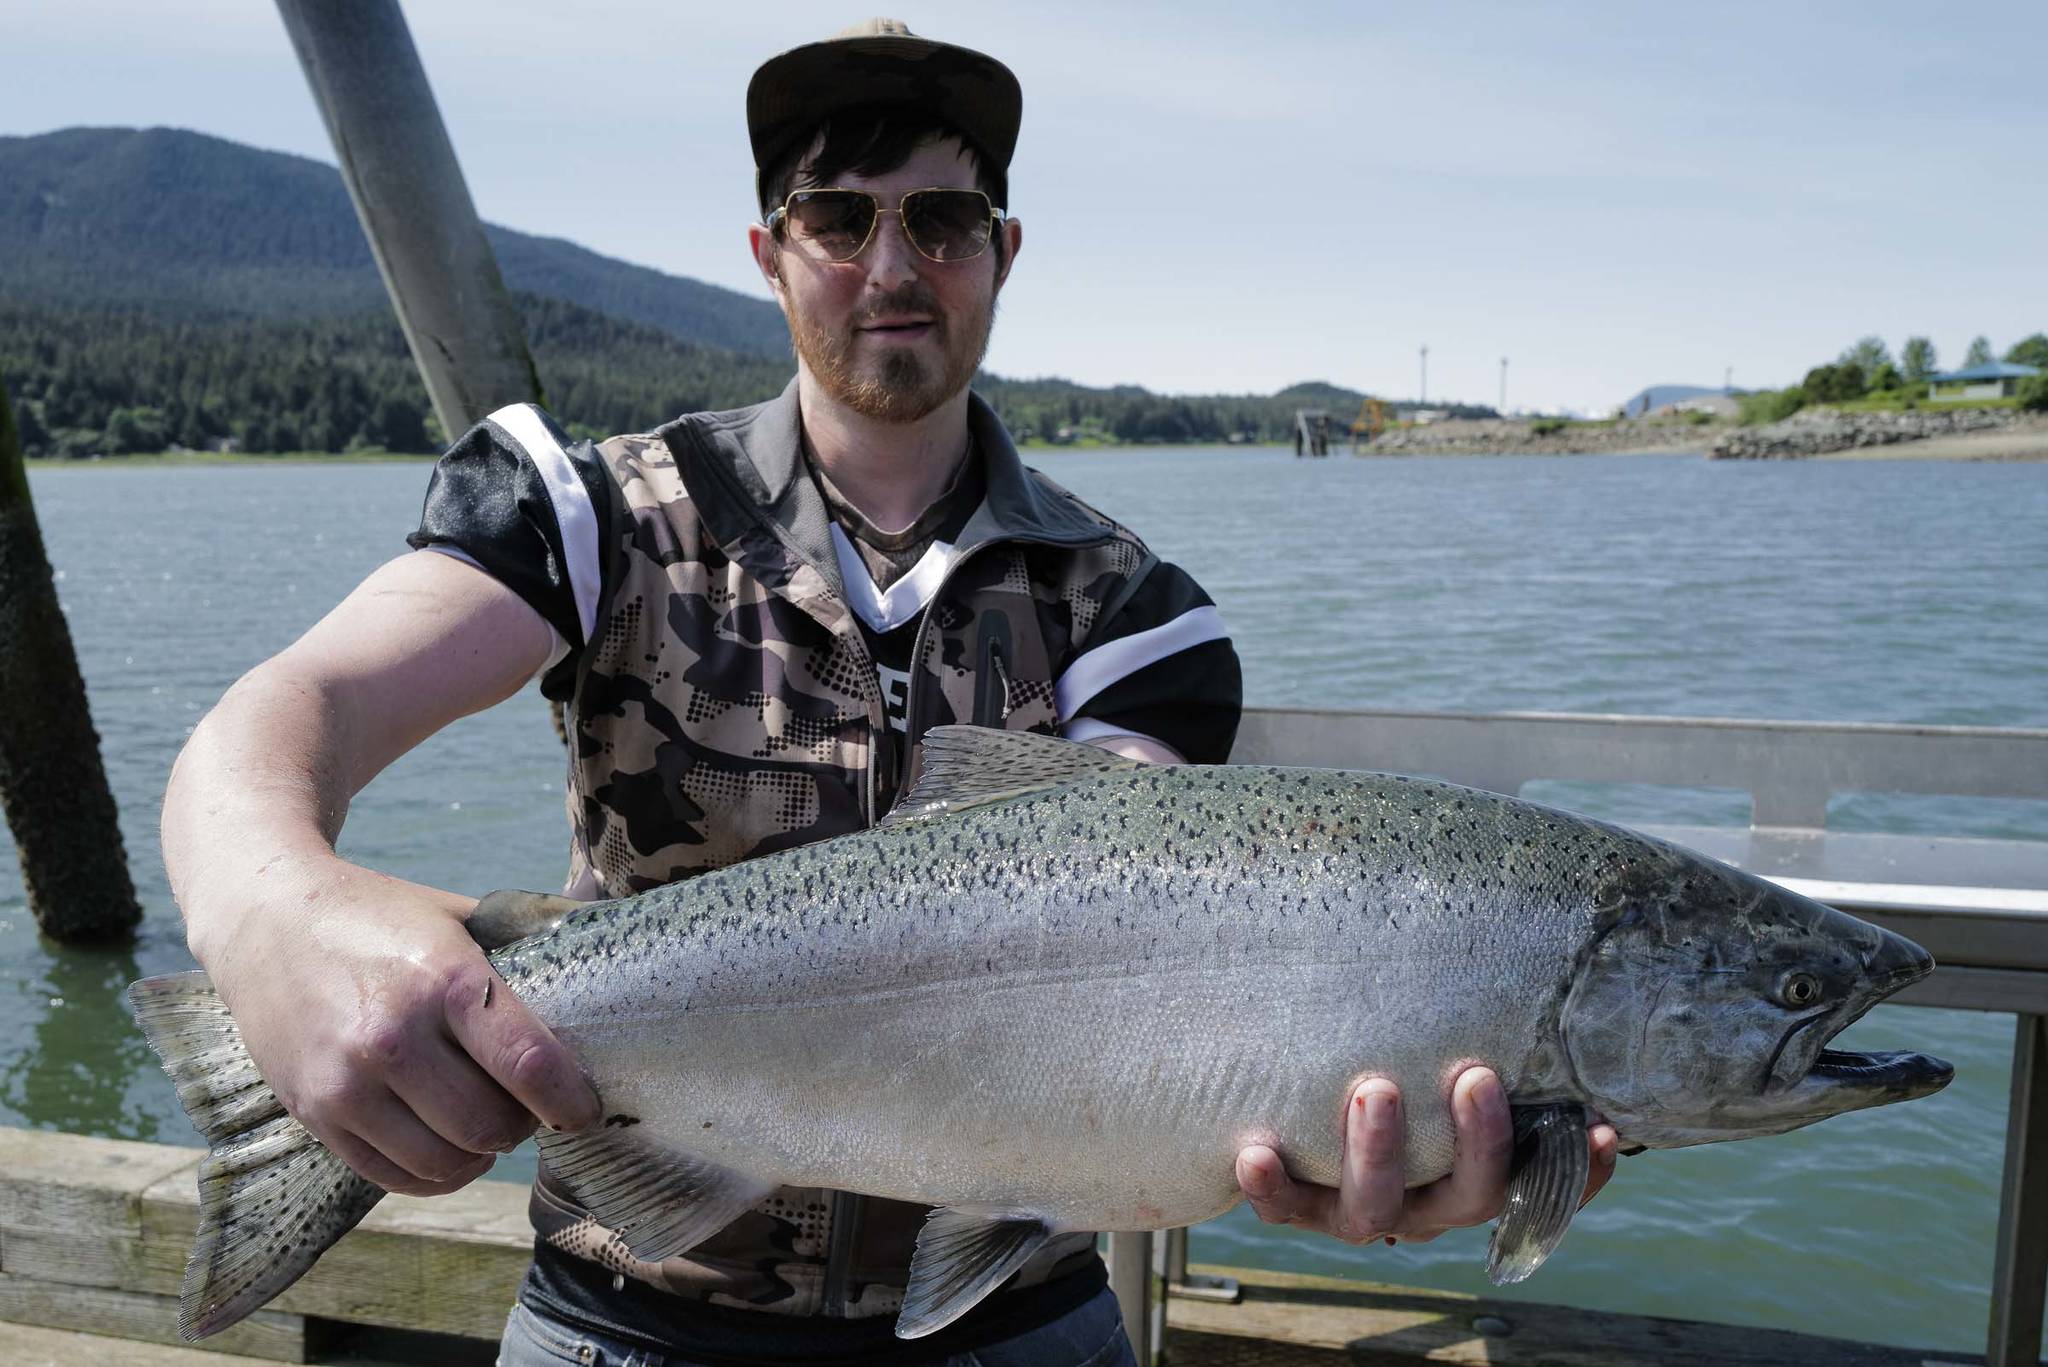 Alexander Masters displays his freshly caught king salmon at the Wayside Park on Channel Drive on Thursday, June 20, 2019. (Michael Penn | Juneau Empire)